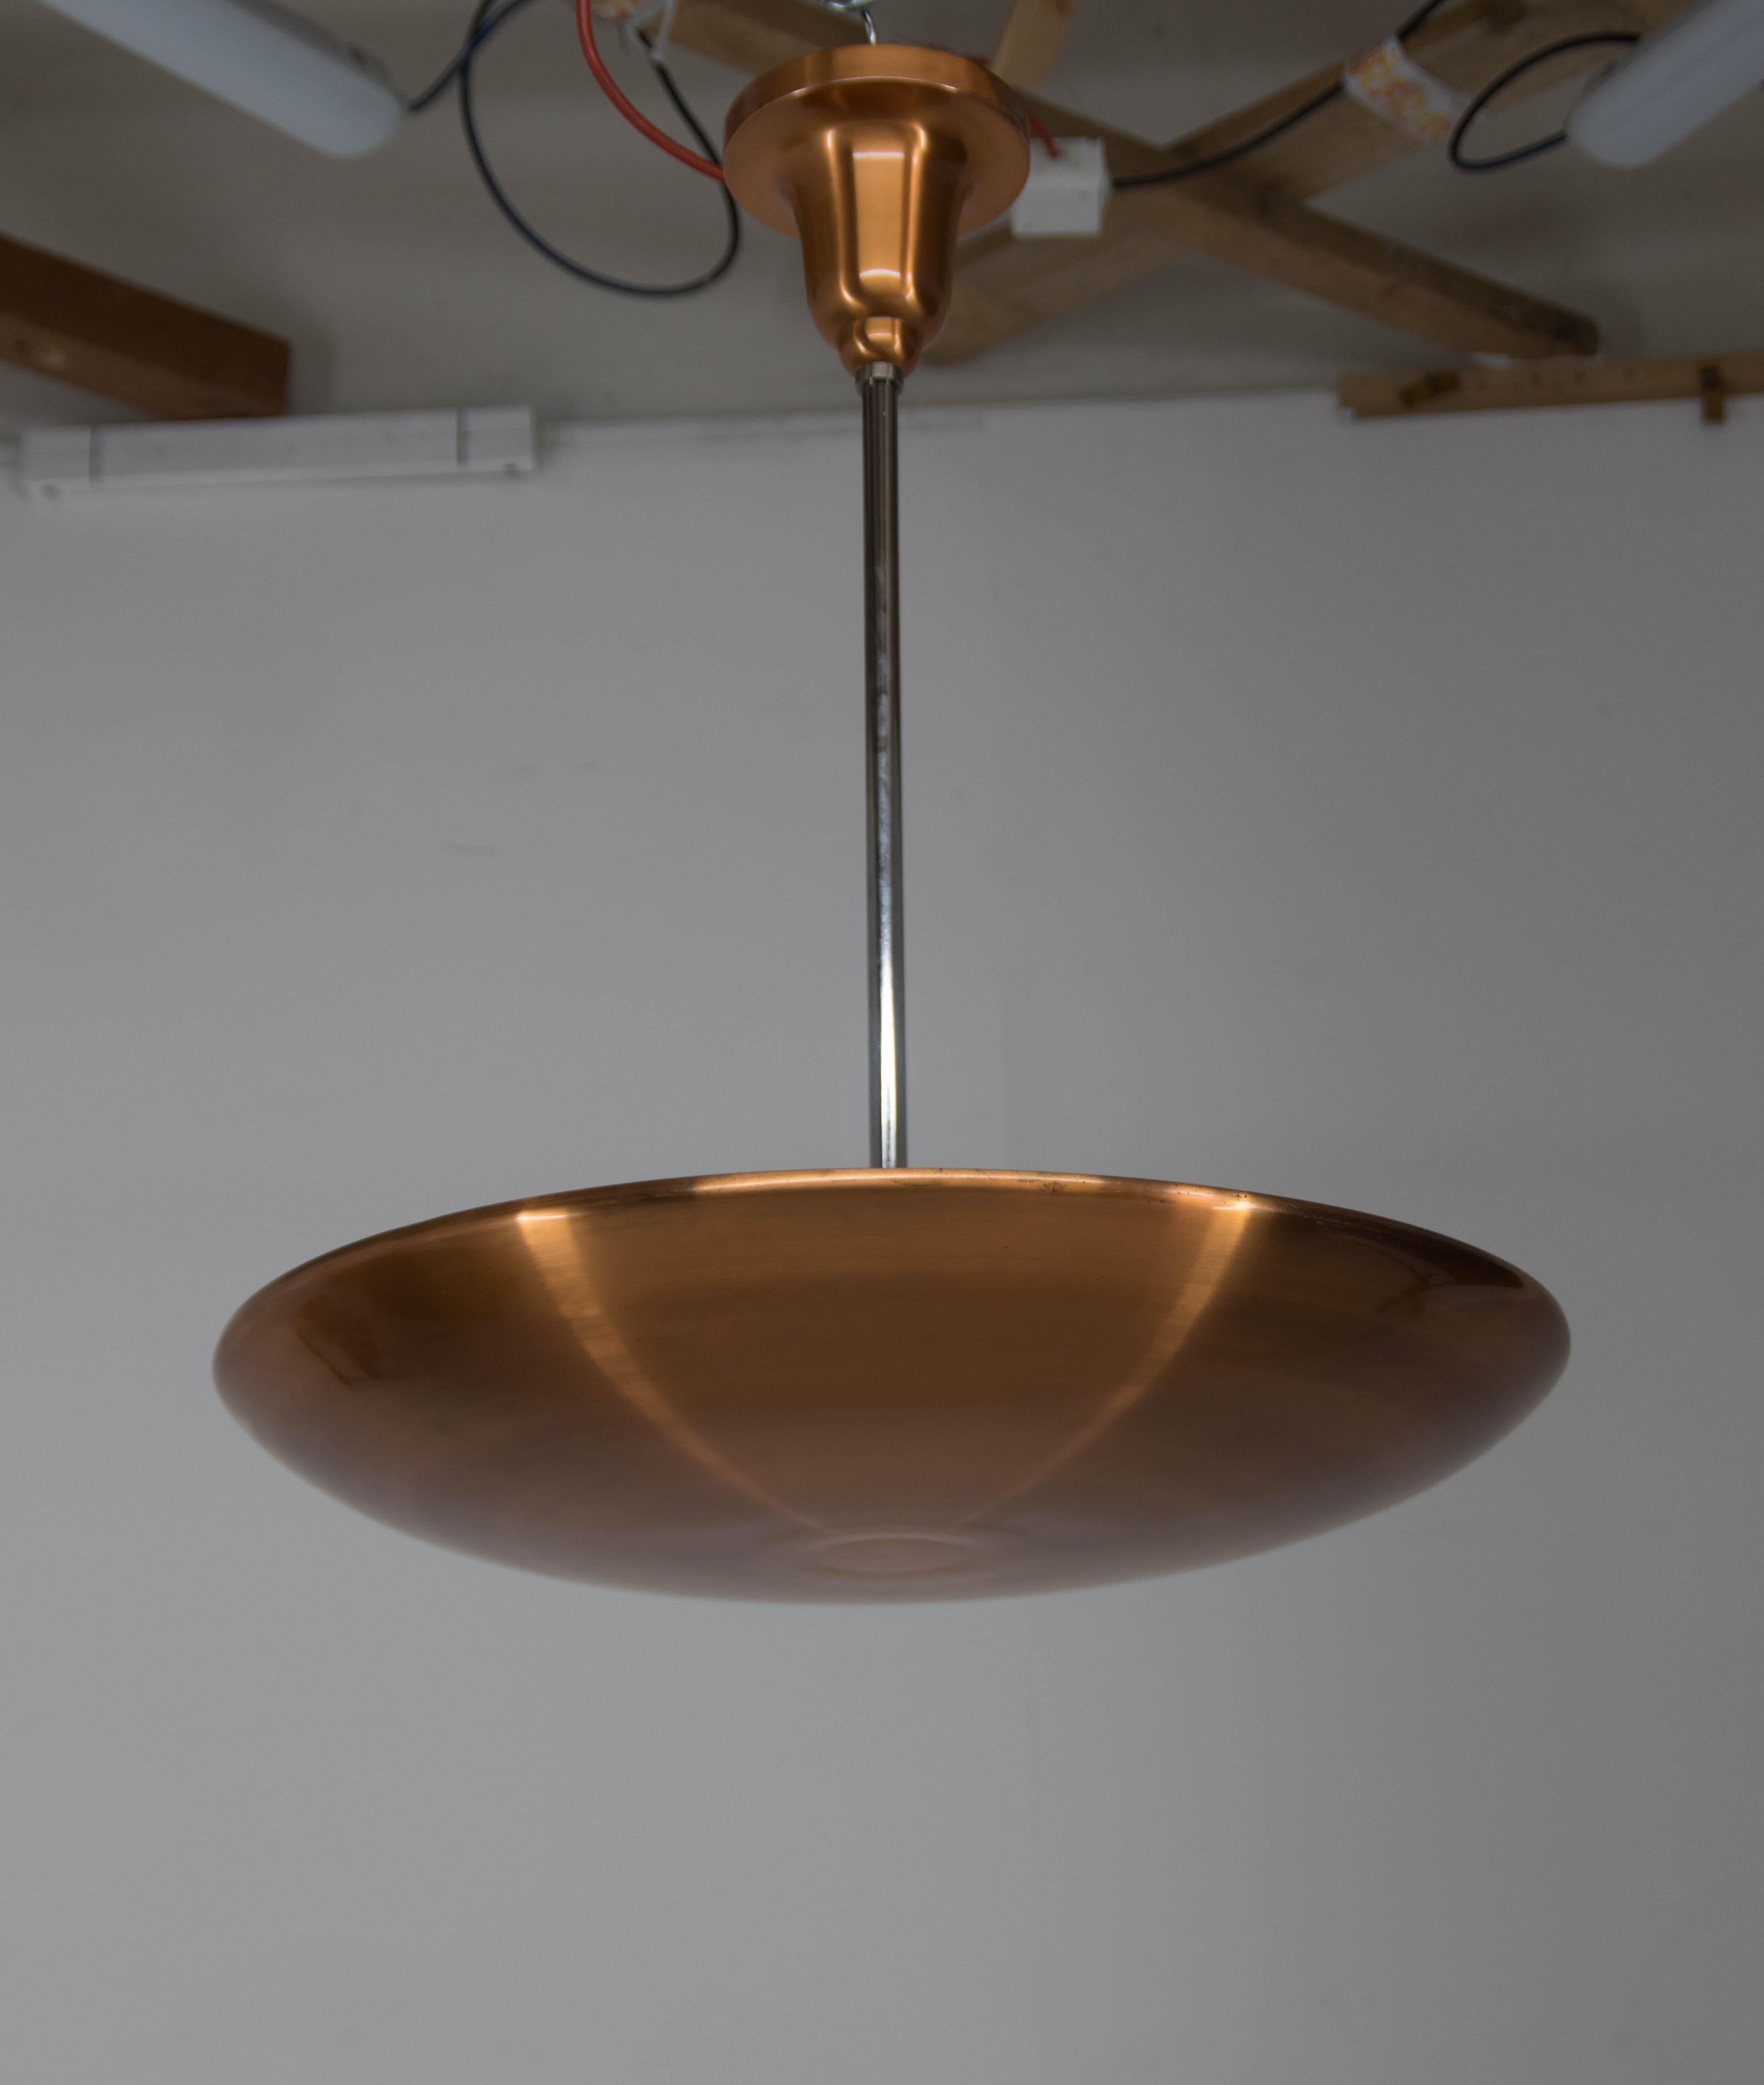 Timeless elegant and simple Bauhaus copper pendant made by IAS in late 1930s.
Very well preserved - only minimum scratches.
Restored: lacquered copper polished
Rewired: 3x60W, E25-E27 bulbs
Chrome central rod can be shorten on demand
US wiring